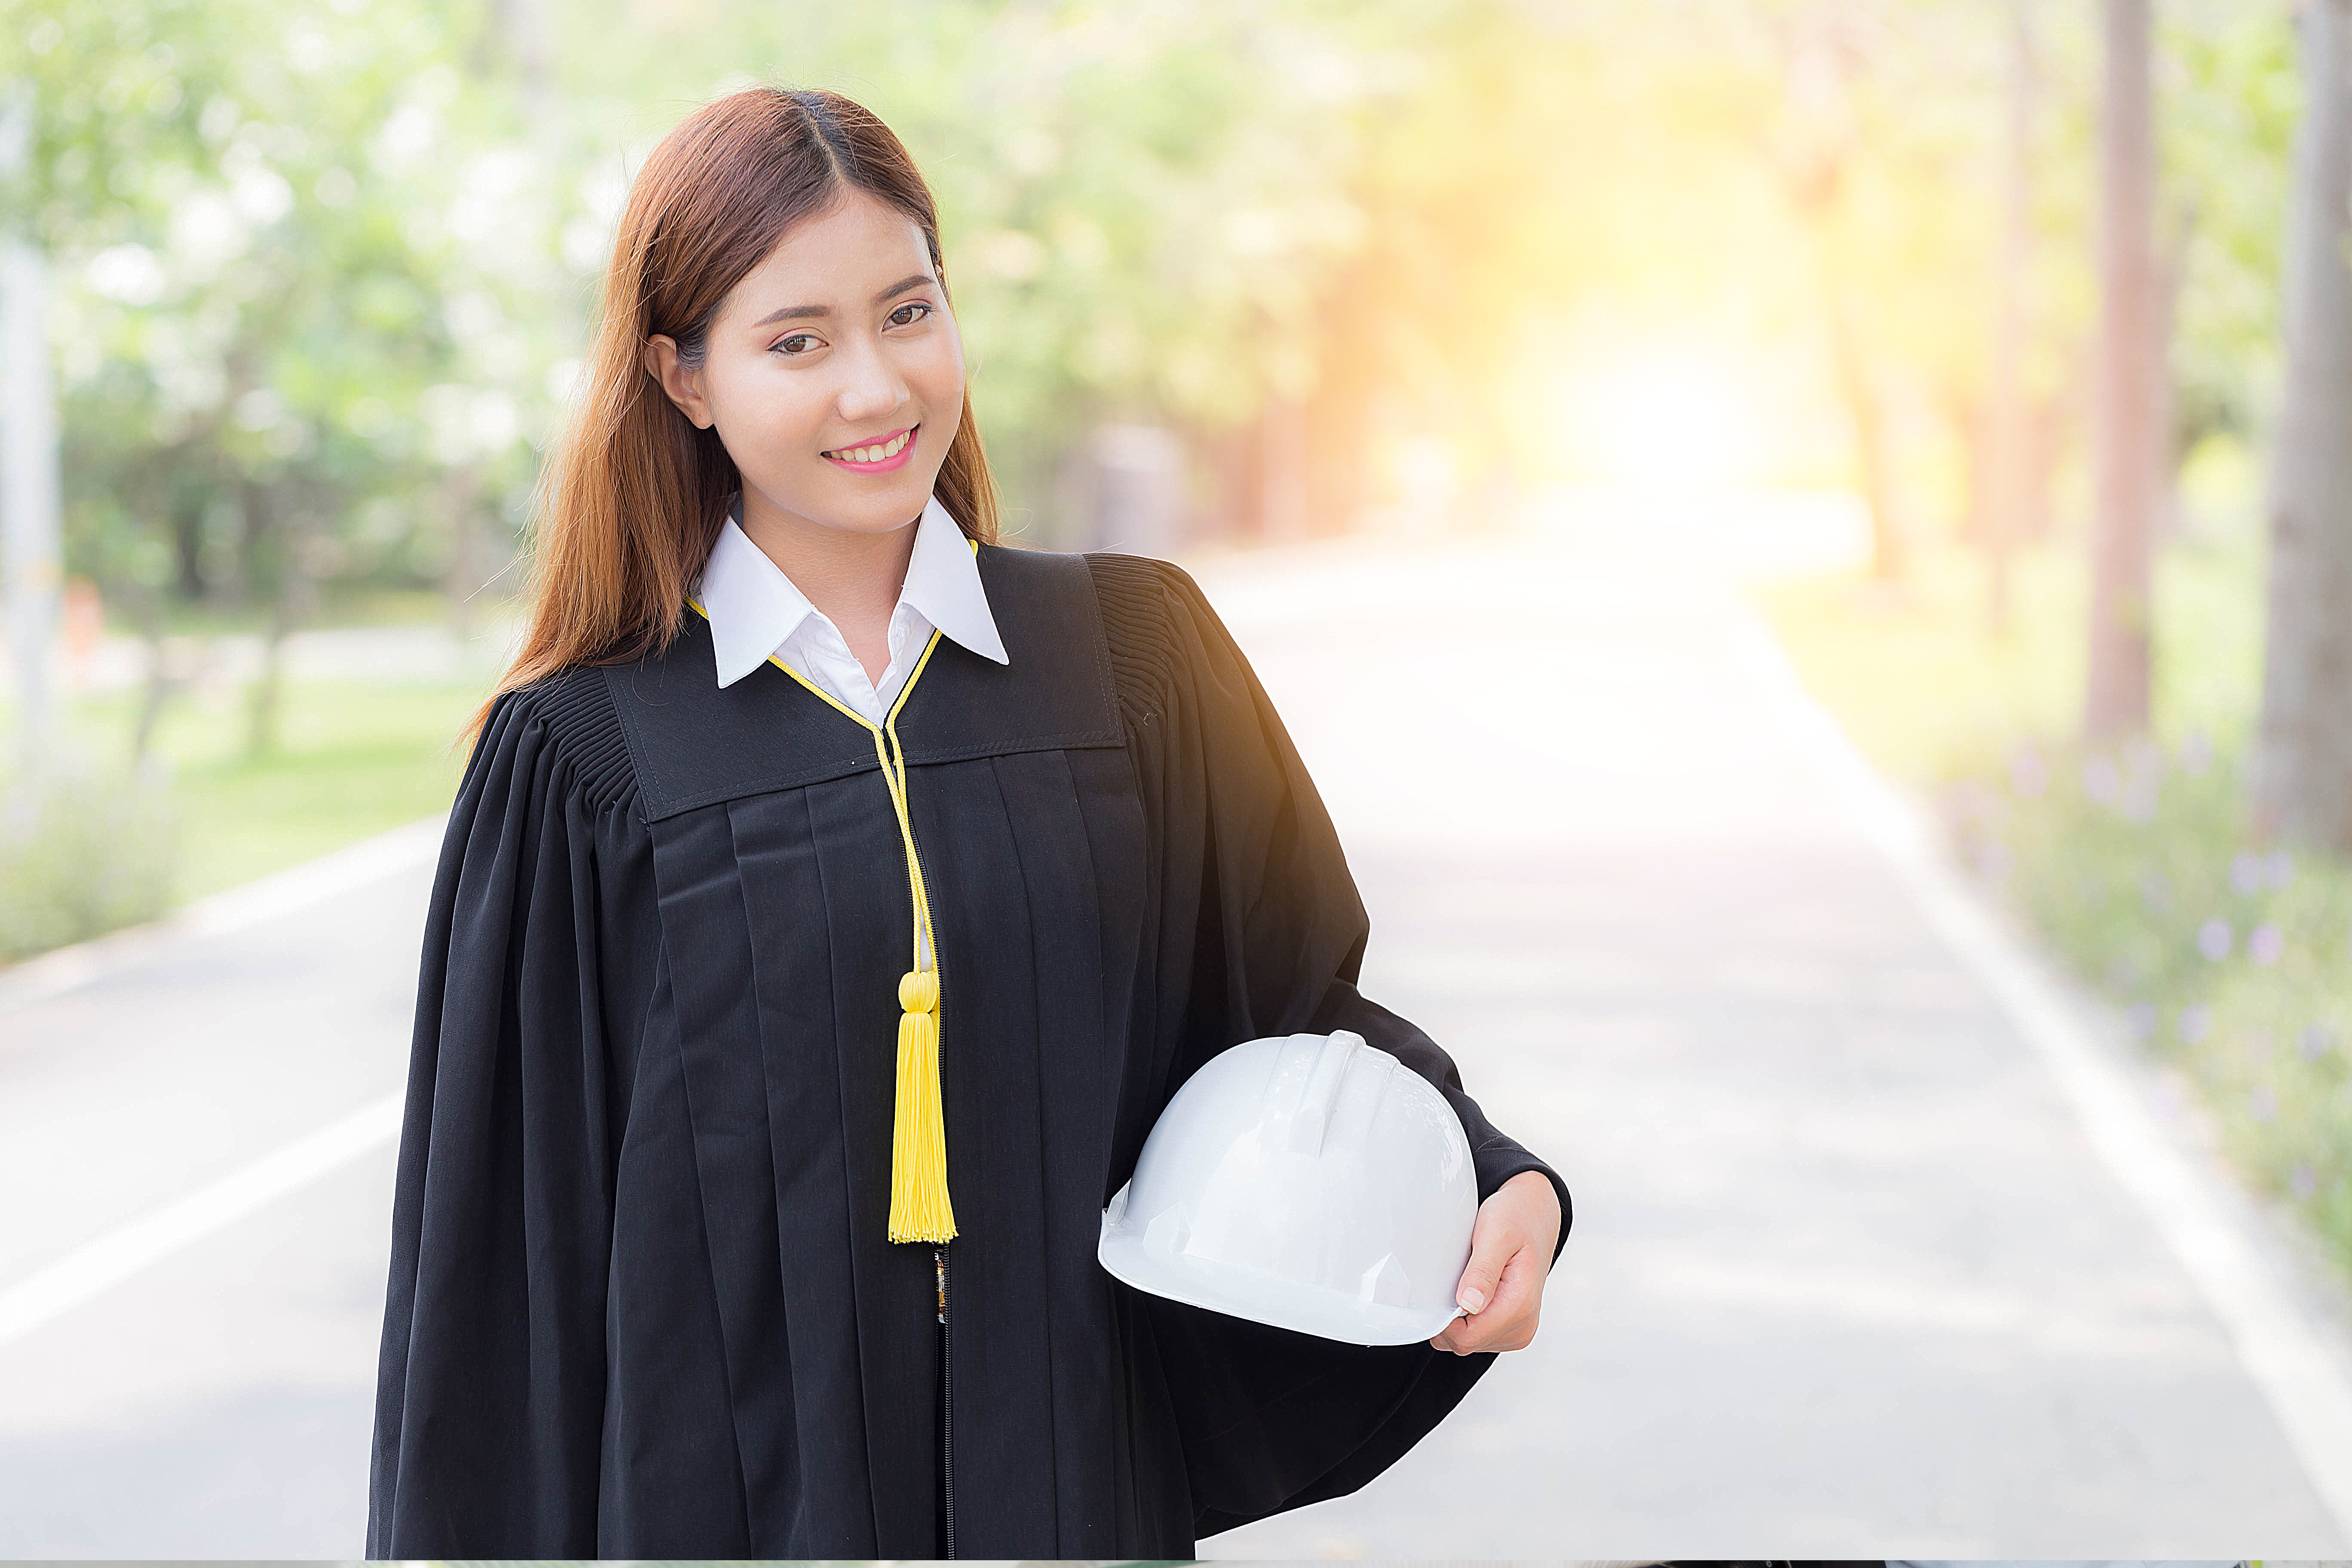 A recently graduated engineer | Source: Getty Images